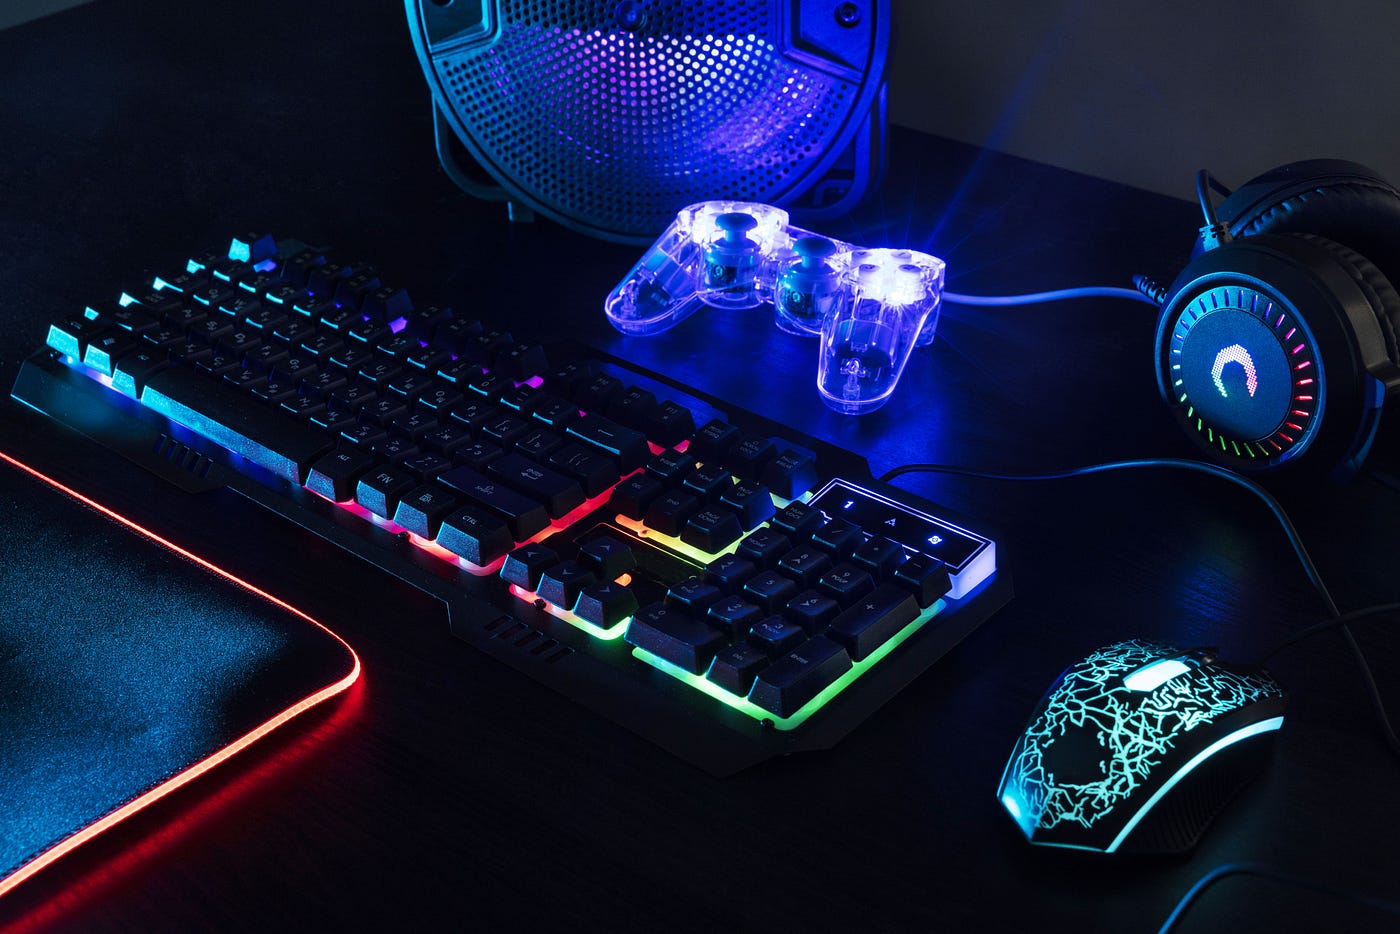 The Top Gaming Accessories for Enhancing Your PC Gaming Experience